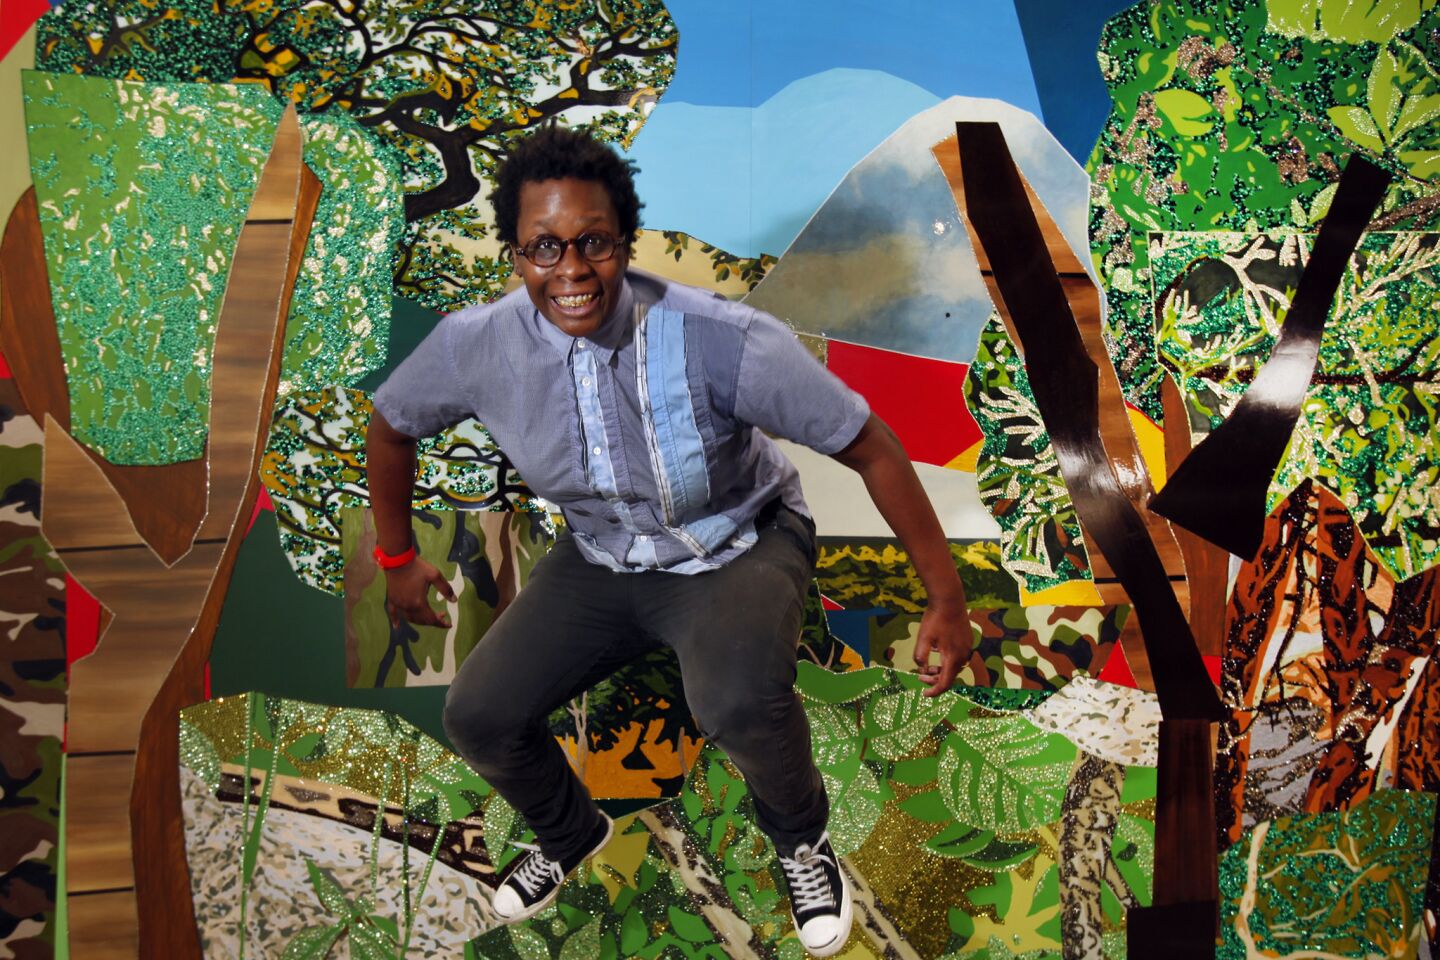 Arts and culture in pictures by The Times | Artist Mickalene Thomas